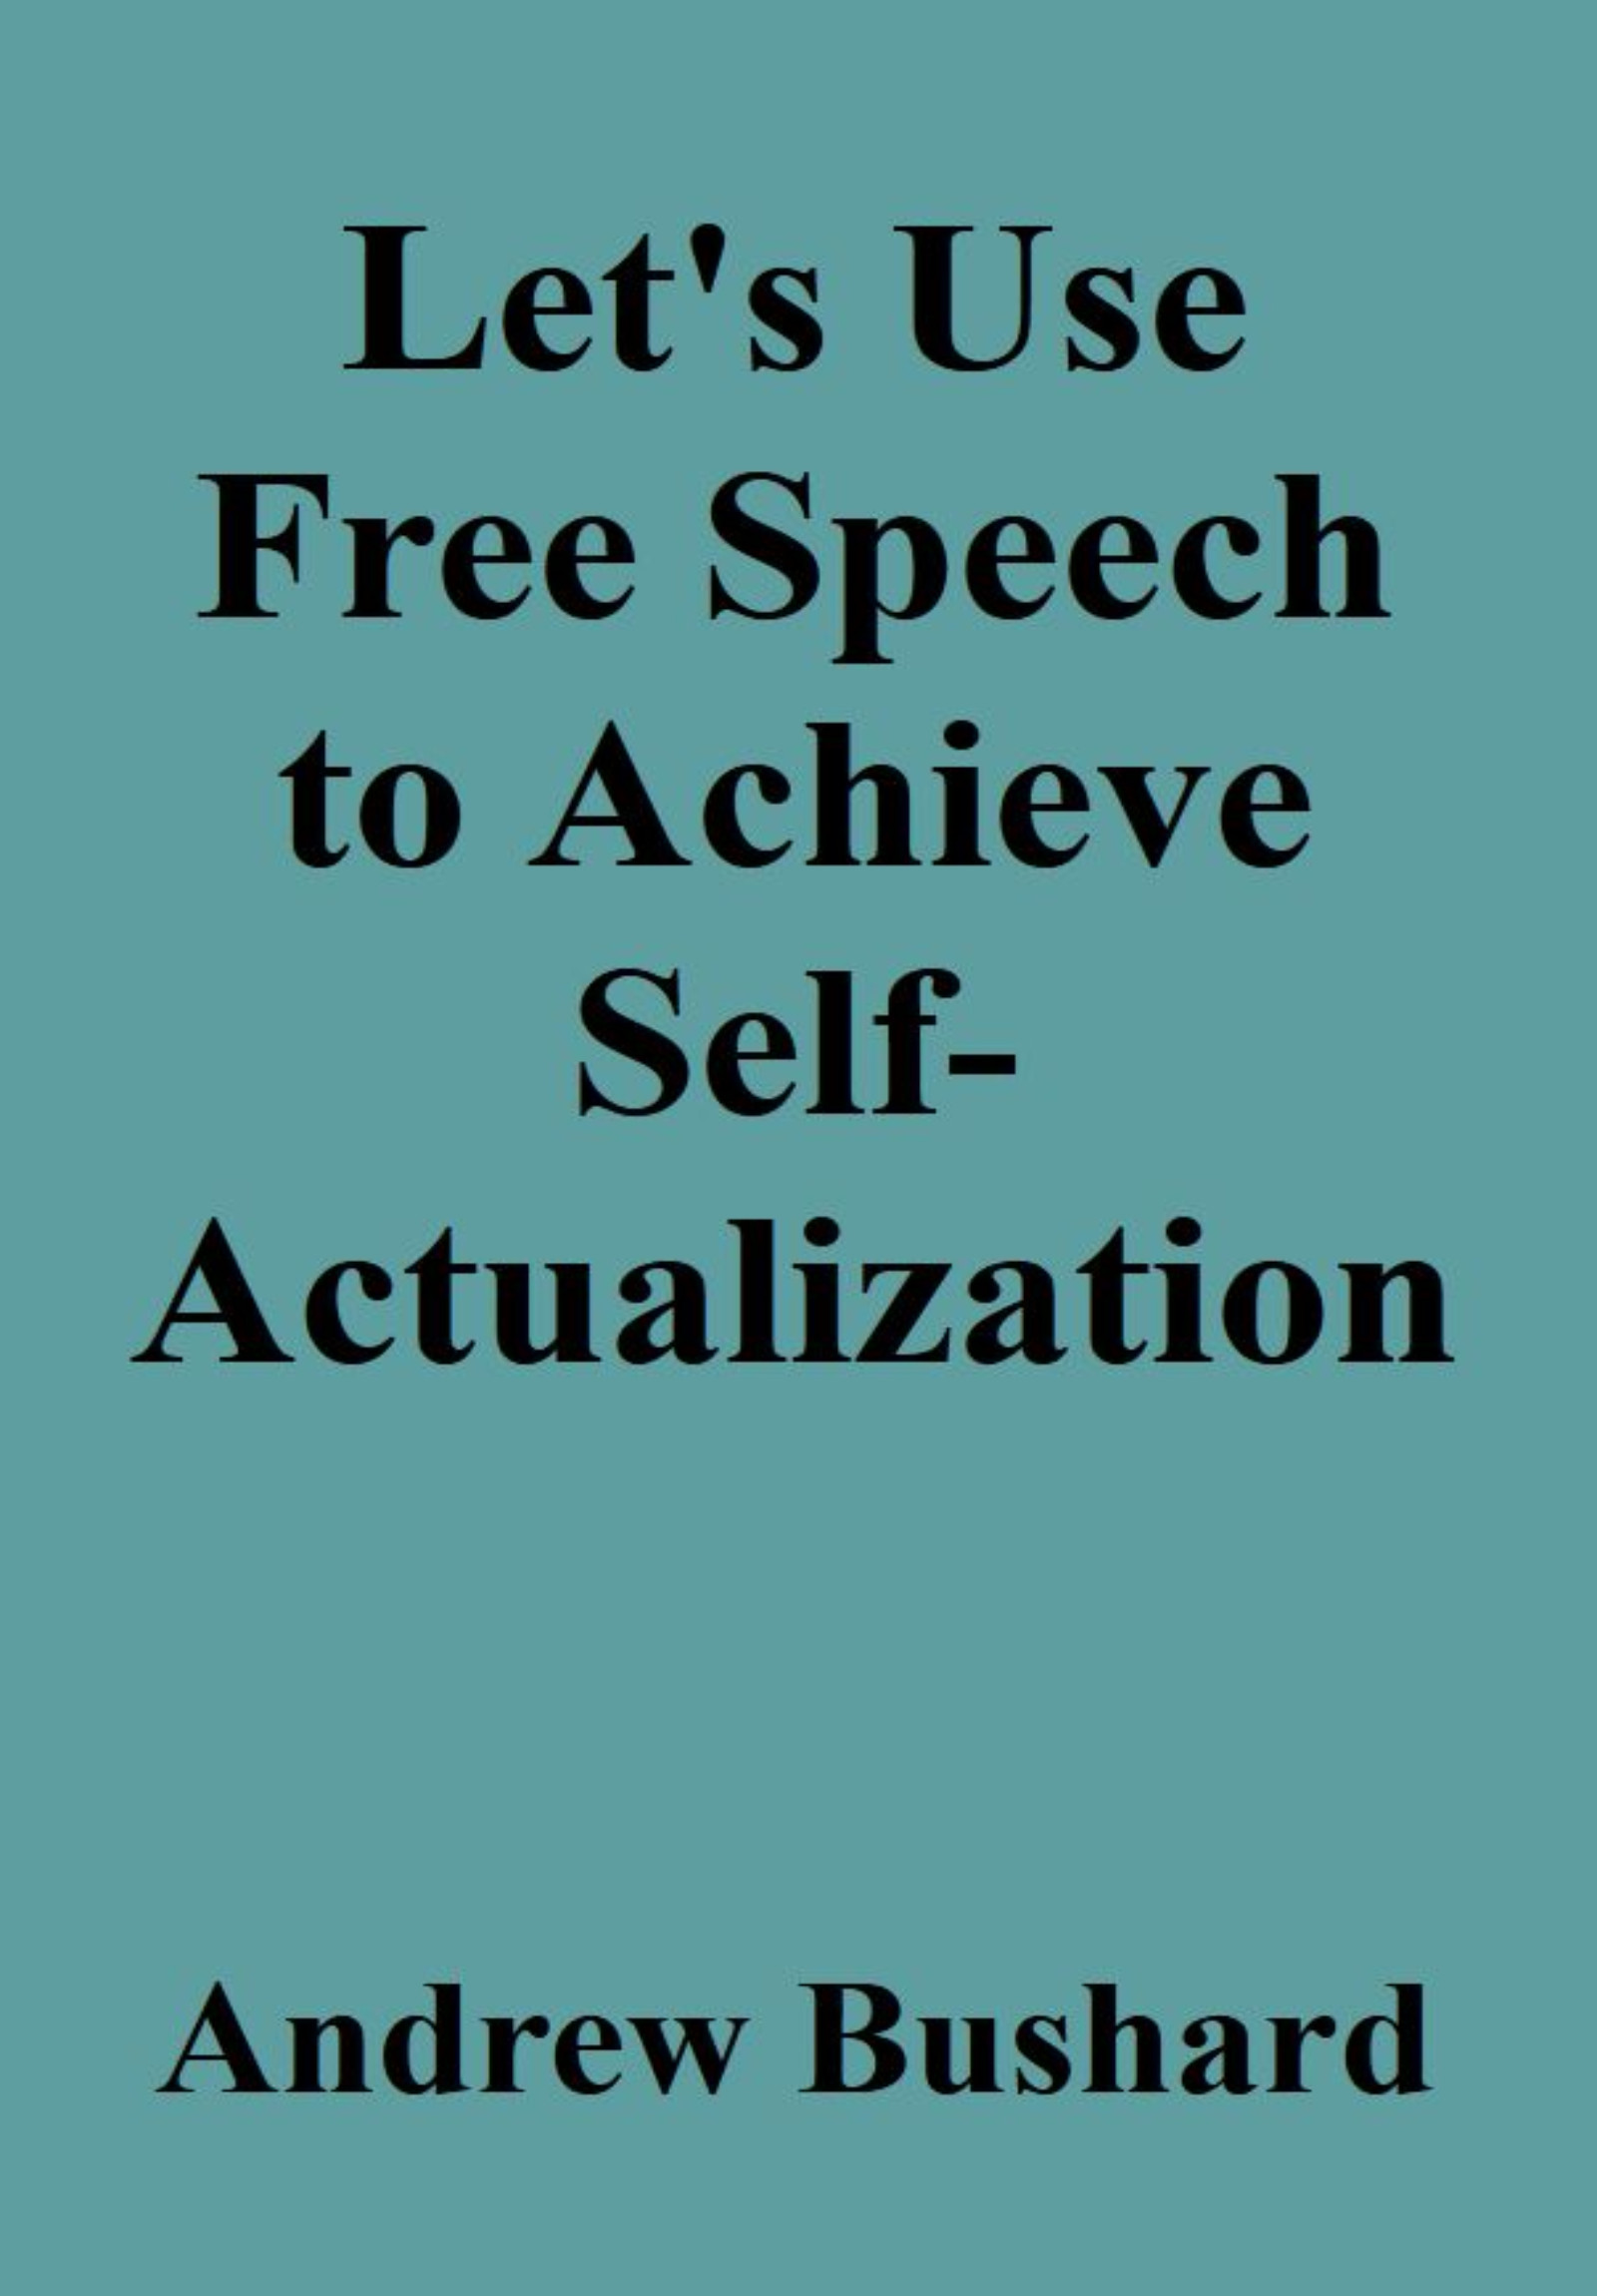 Let's Use Free Speech to Achieve Self-Actualization's featured image